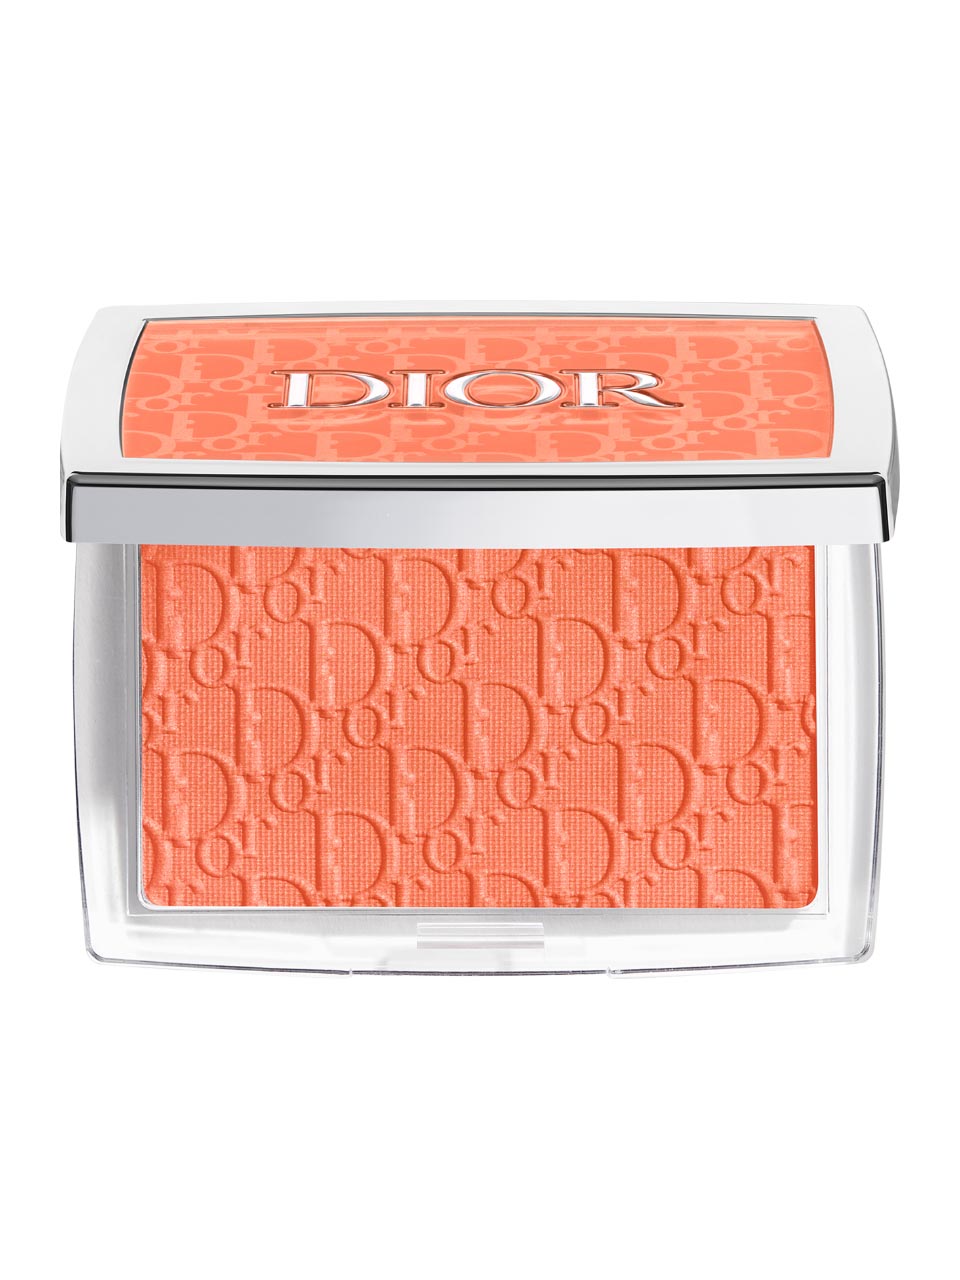 Dior Backstage Rosy Glow Blush N° 004 Coral null - onesize - 1